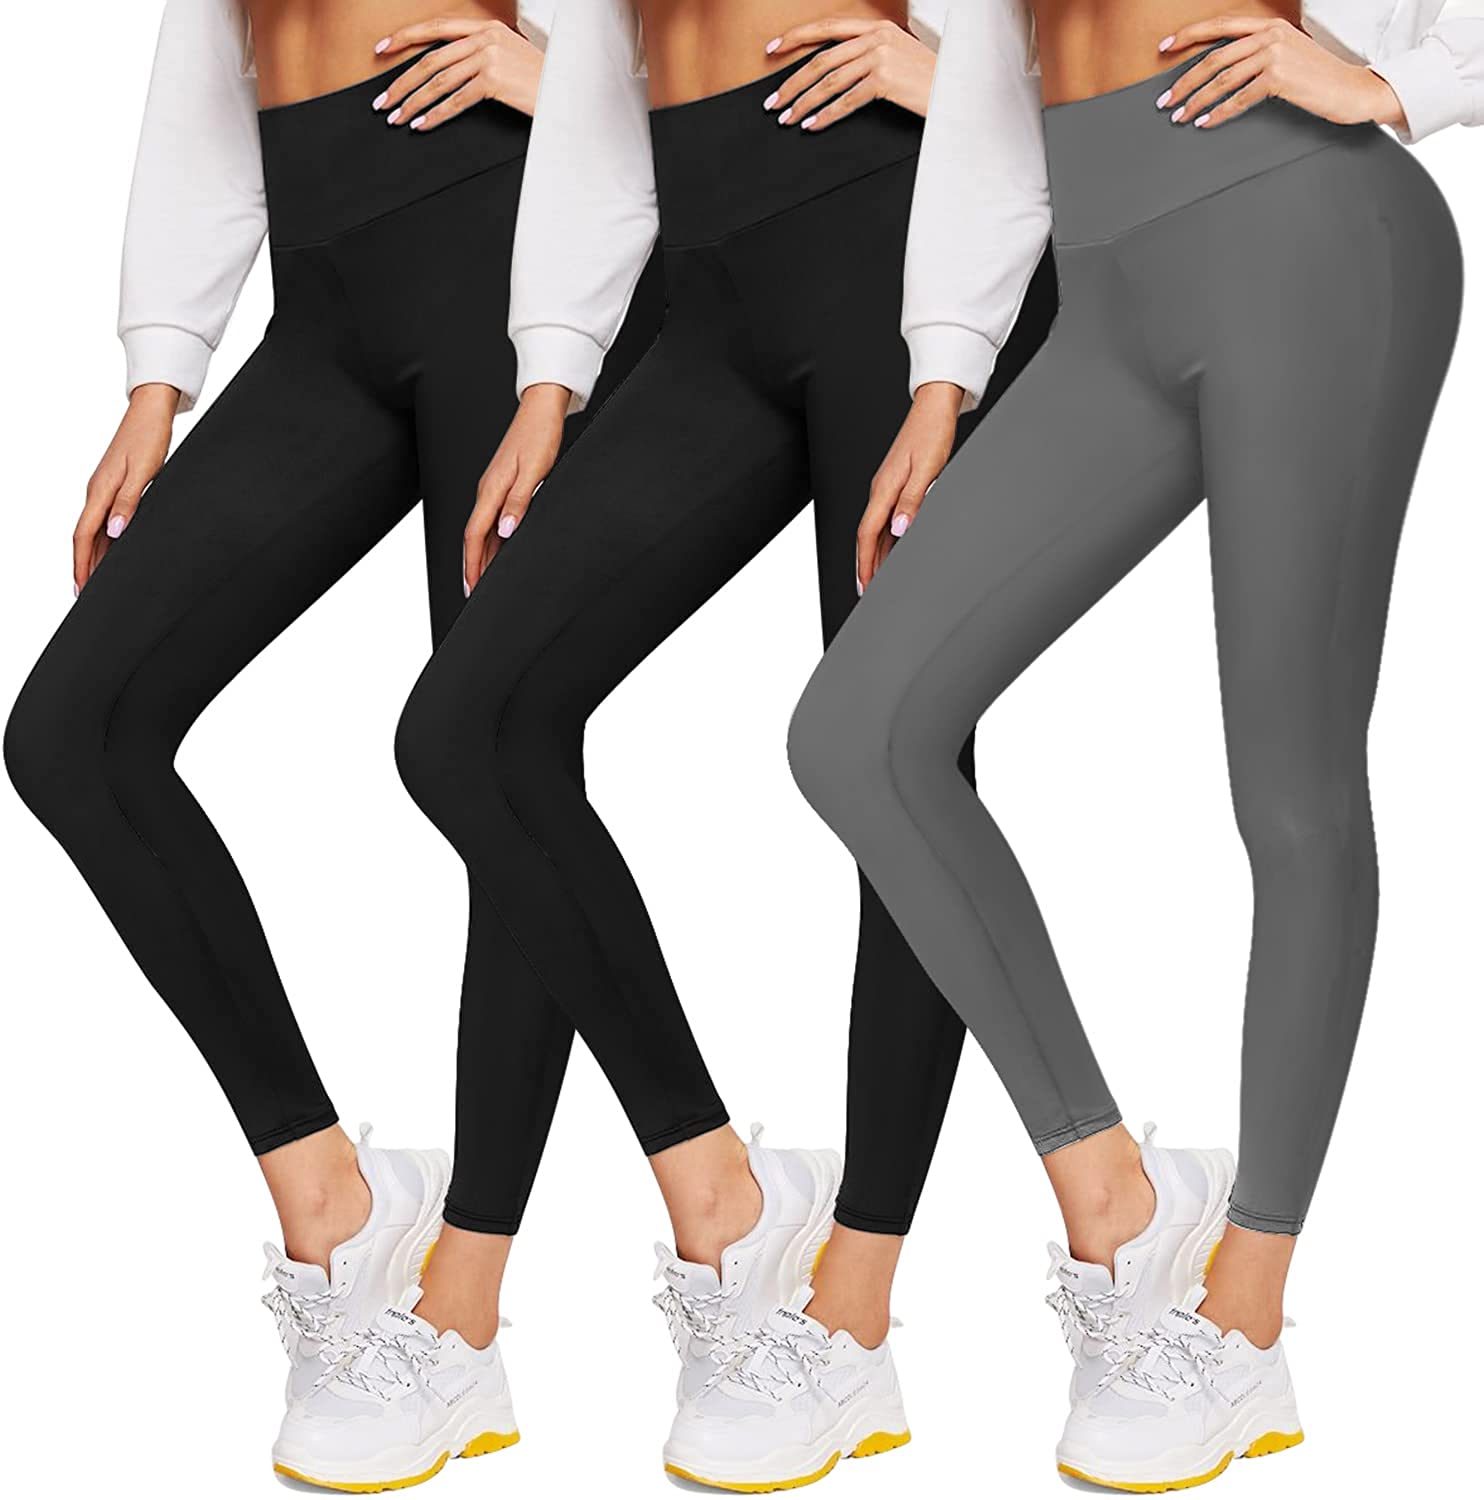  3 Pack Leggings For Women-No See-Through High Waisted Tummy  Control Yoga Pants Workout Running Legging Large-X-Large